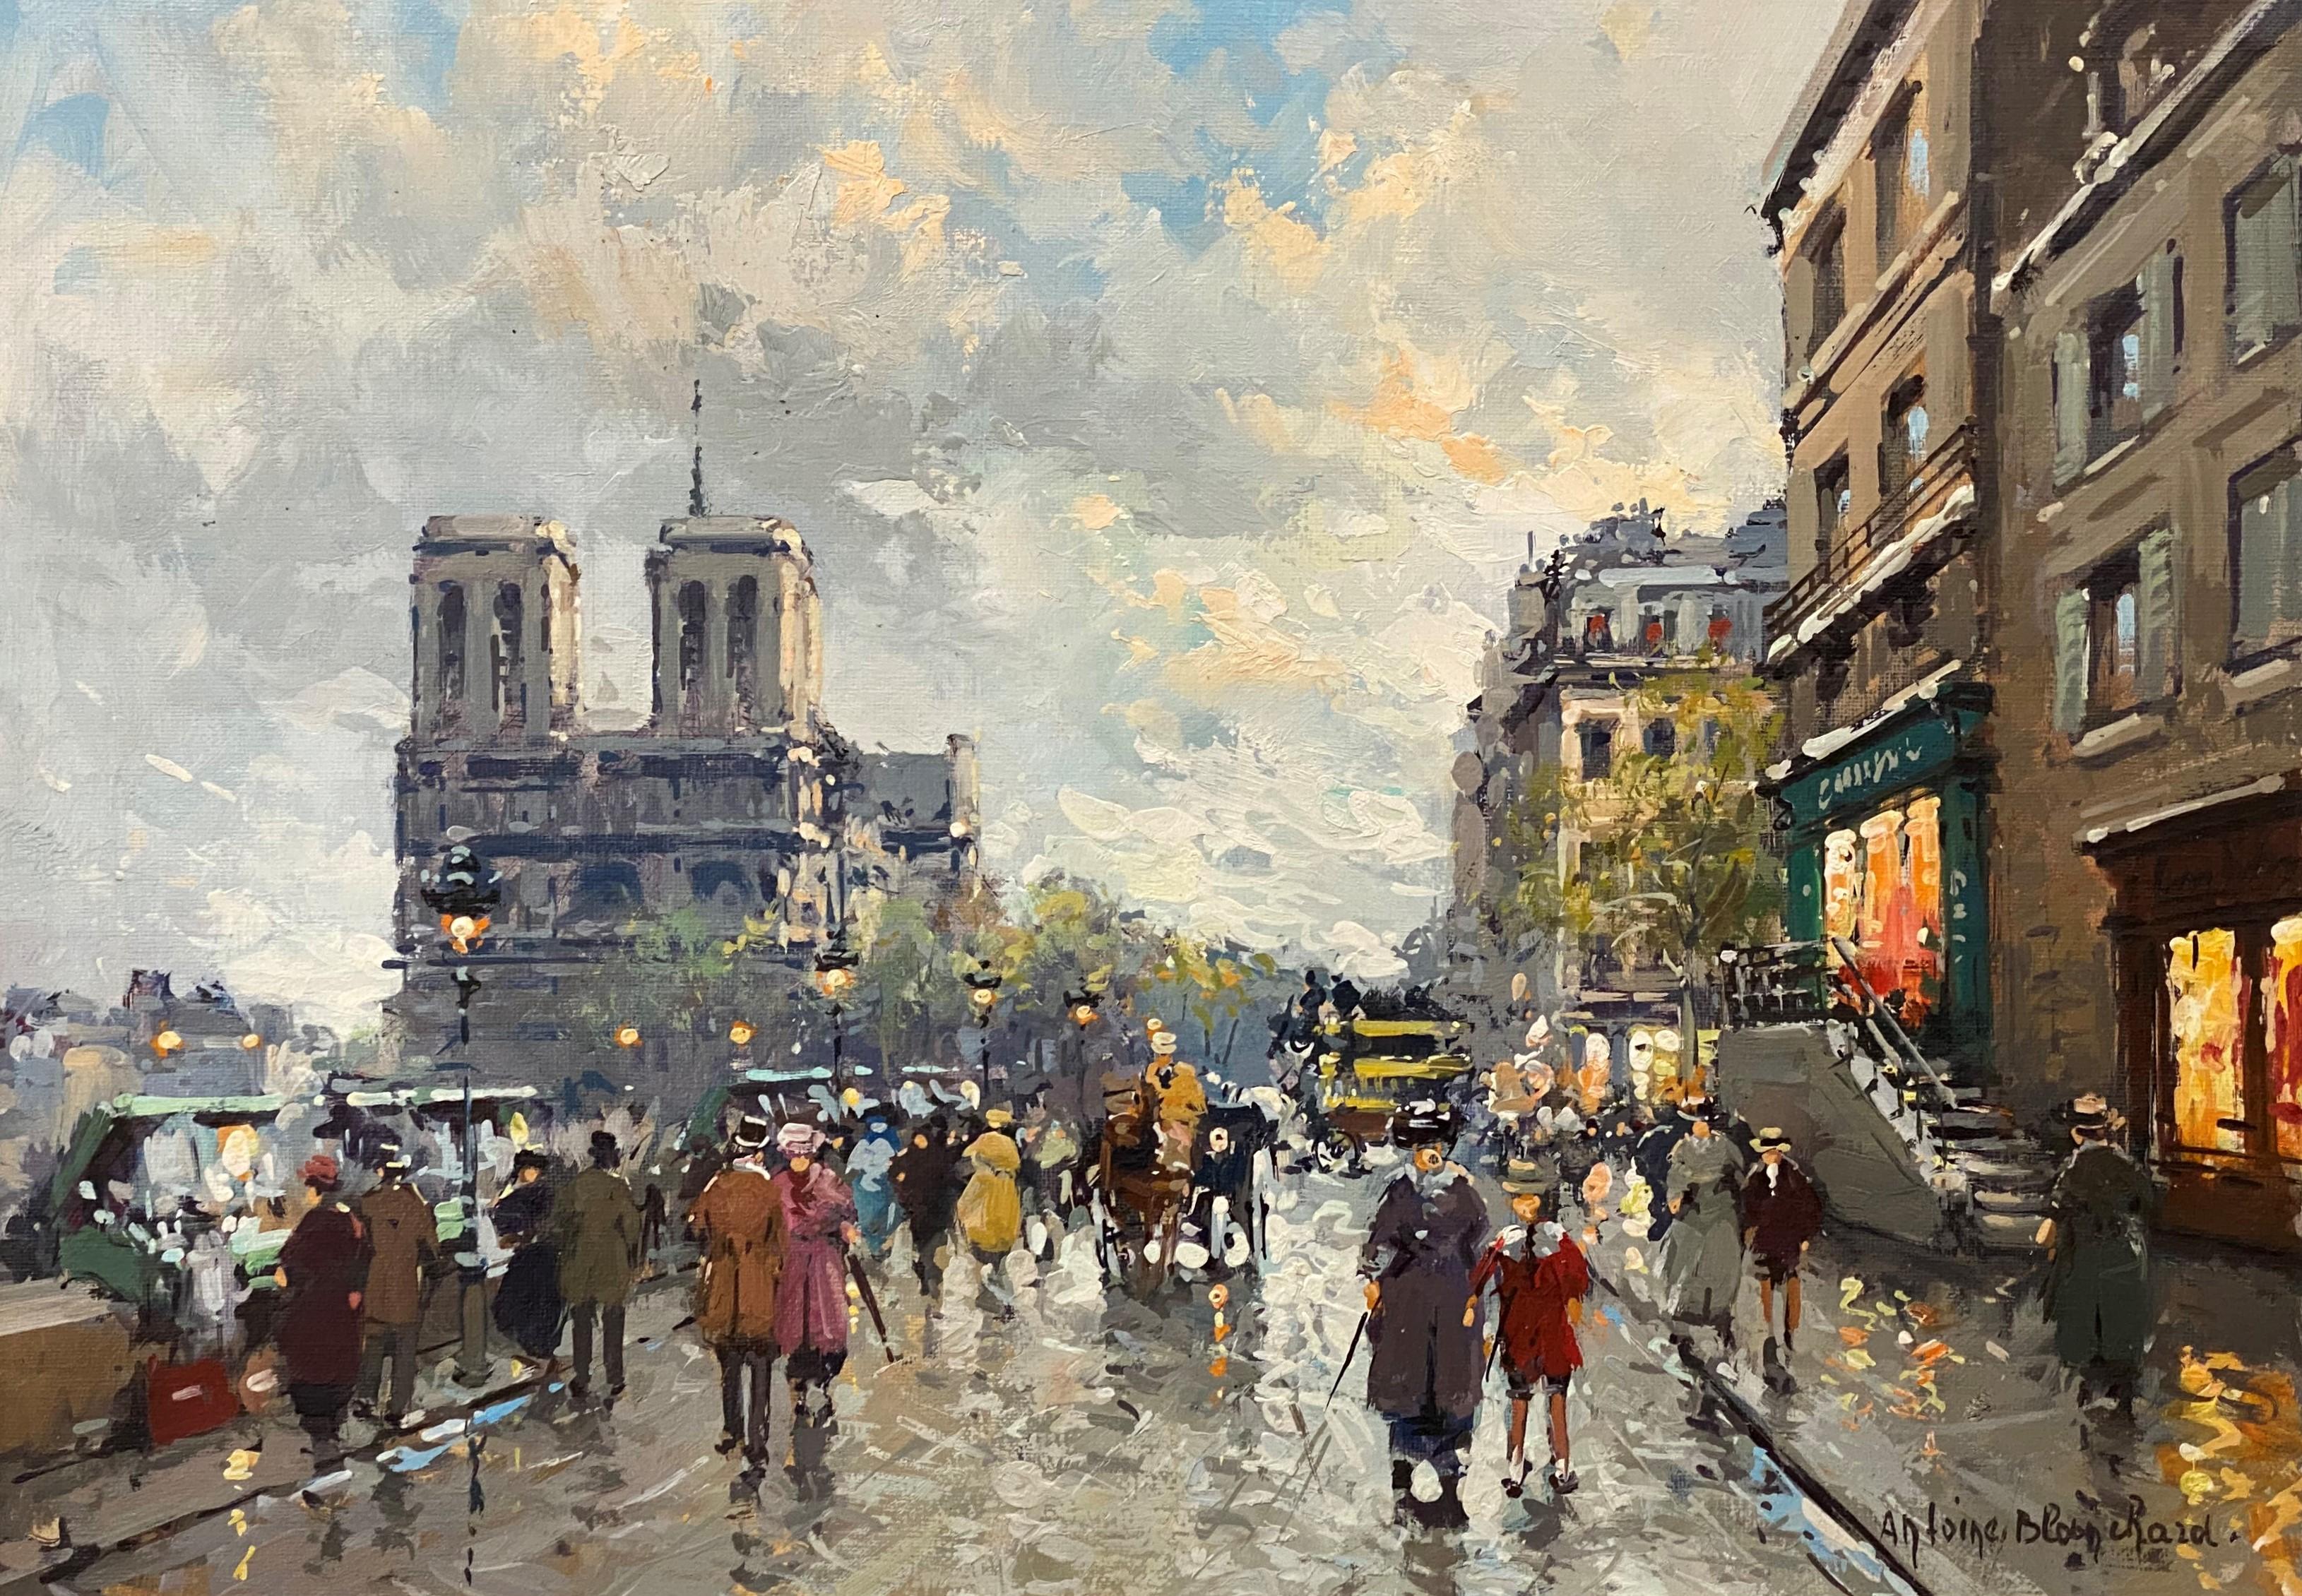 Parisian Street Scene with Notre Dame - Impressionist Art by Antoine Blanchard